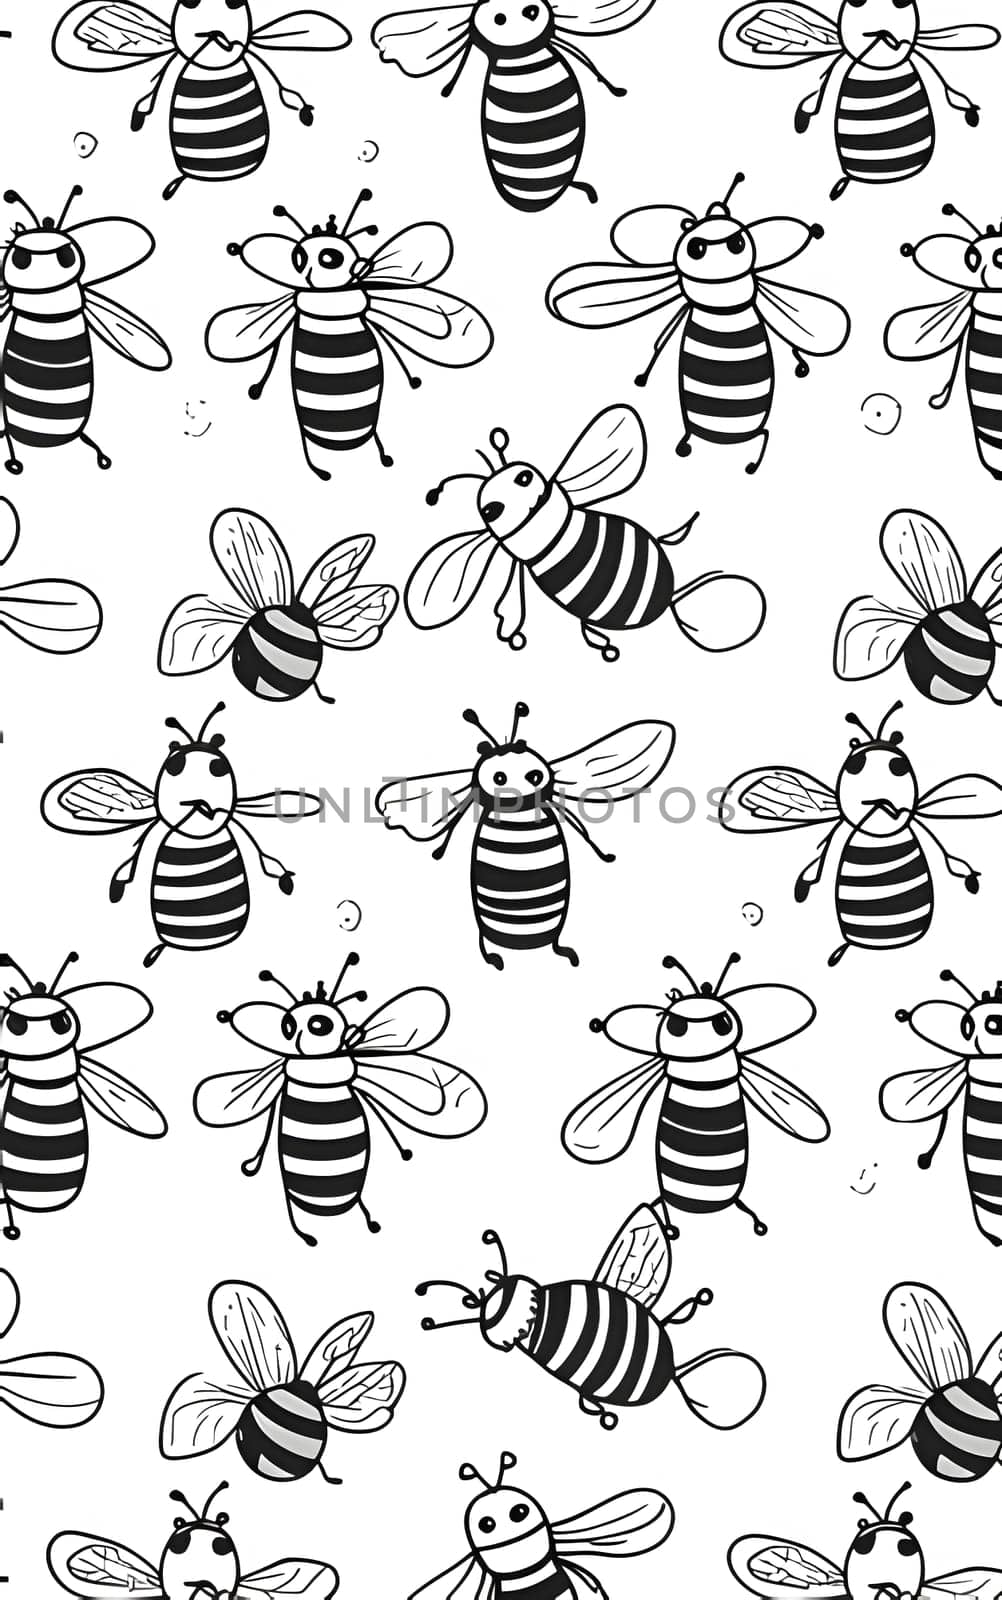 Seamless pattern with cute cartoon bees. Black and white vector illustration. by ThemesS